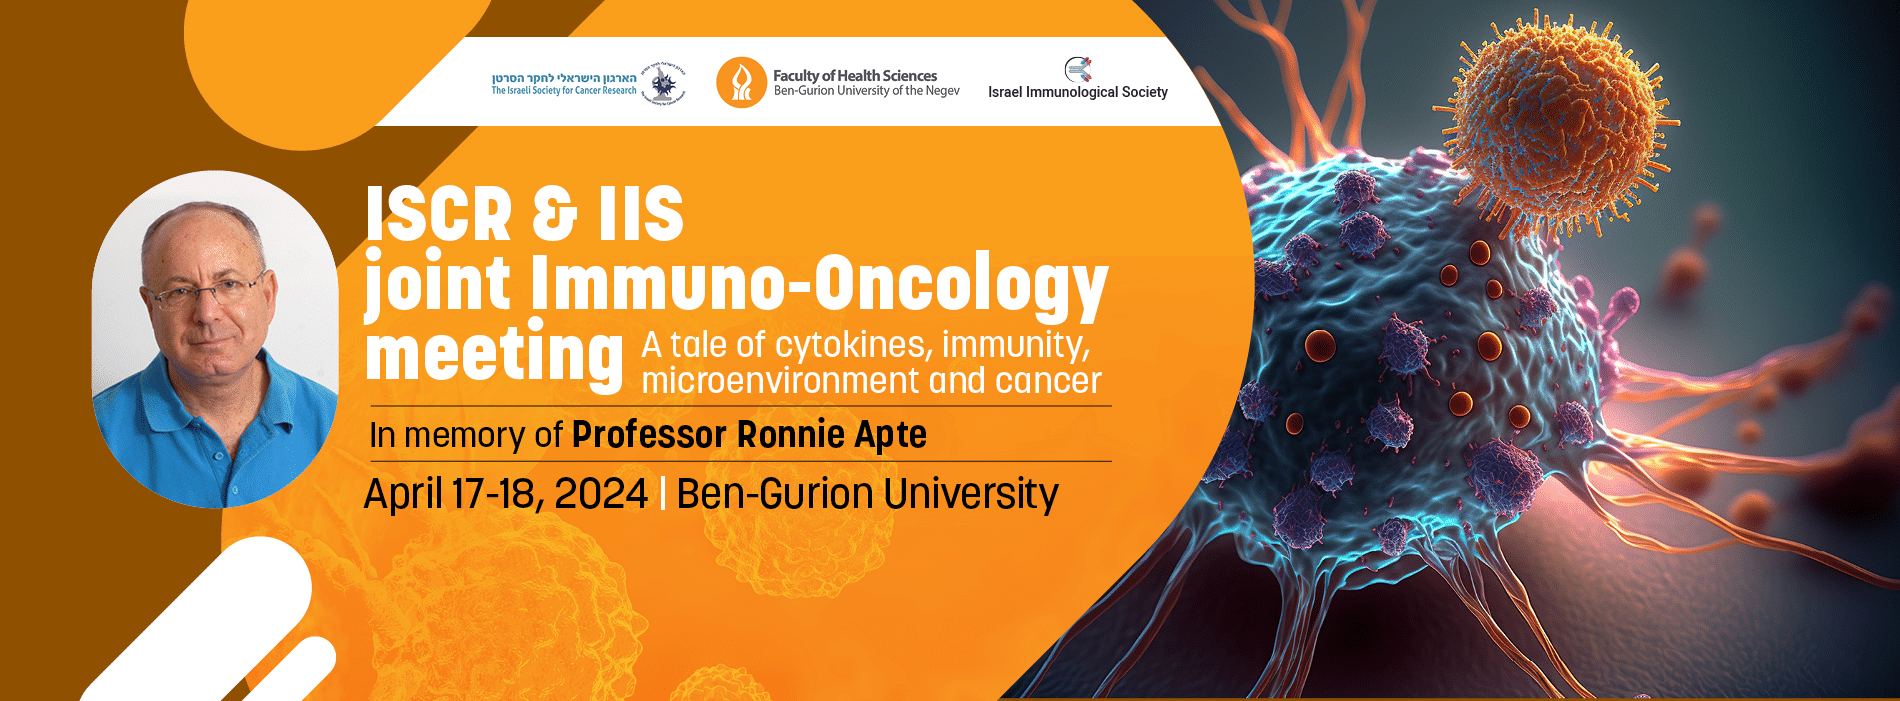 Immuno-Oncology Meeting 2024